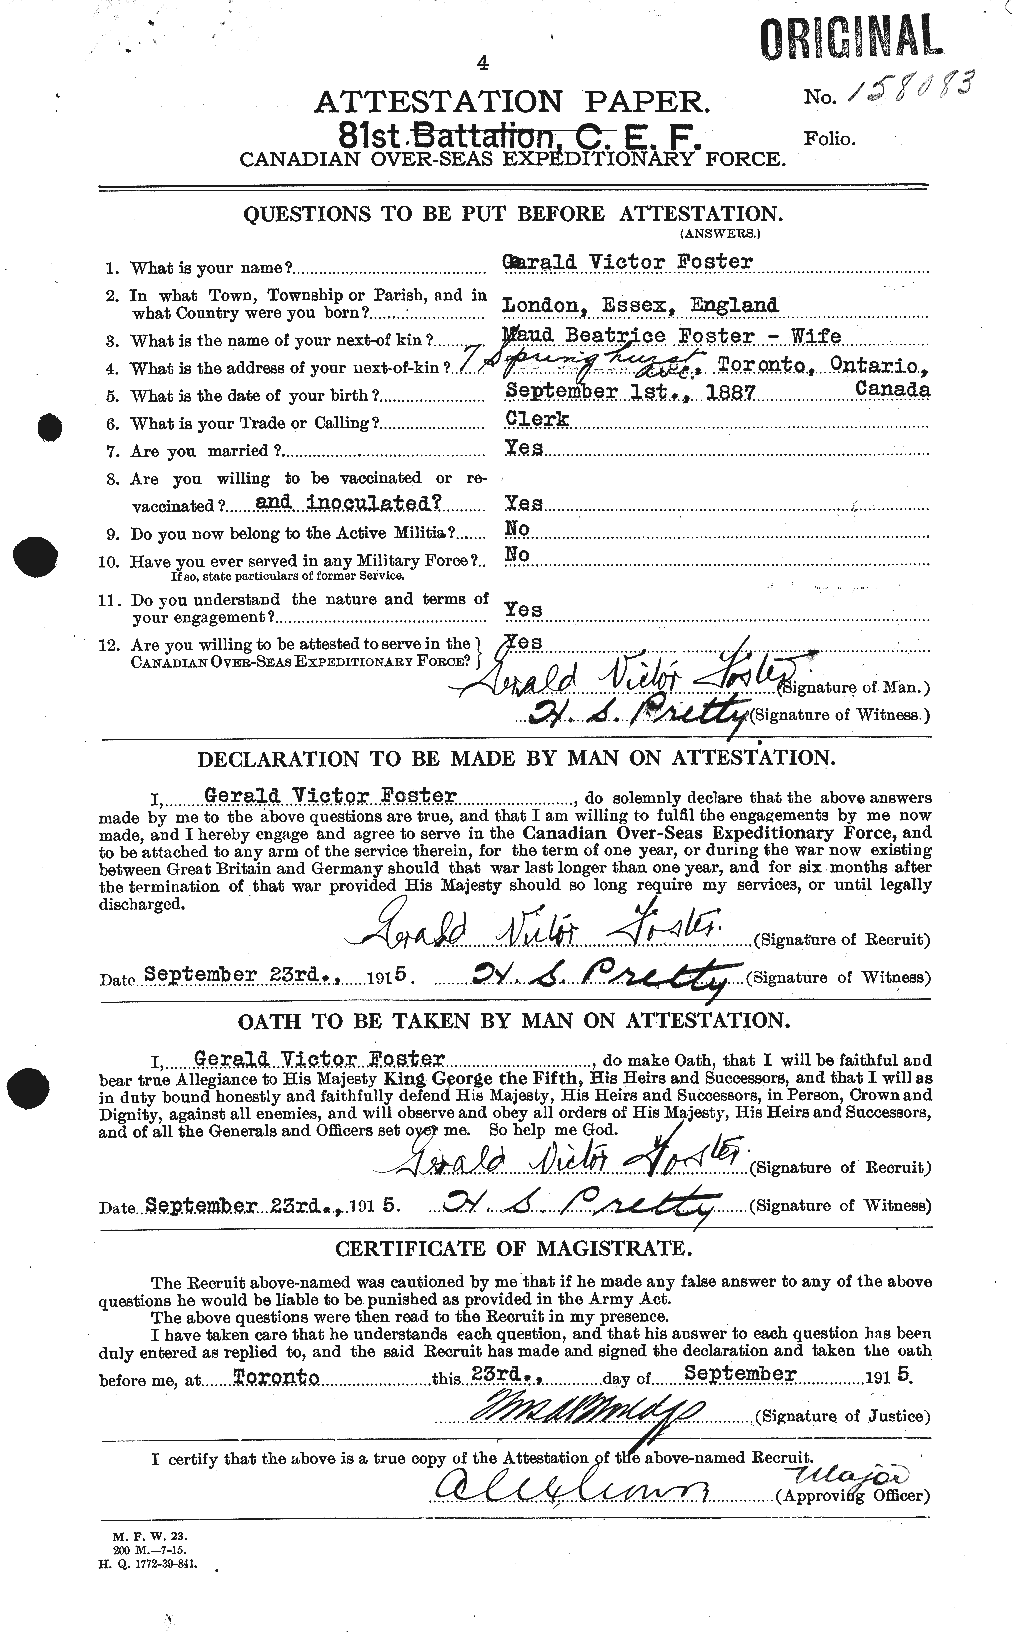 Personnel Records of the First World War - CEF 330711a